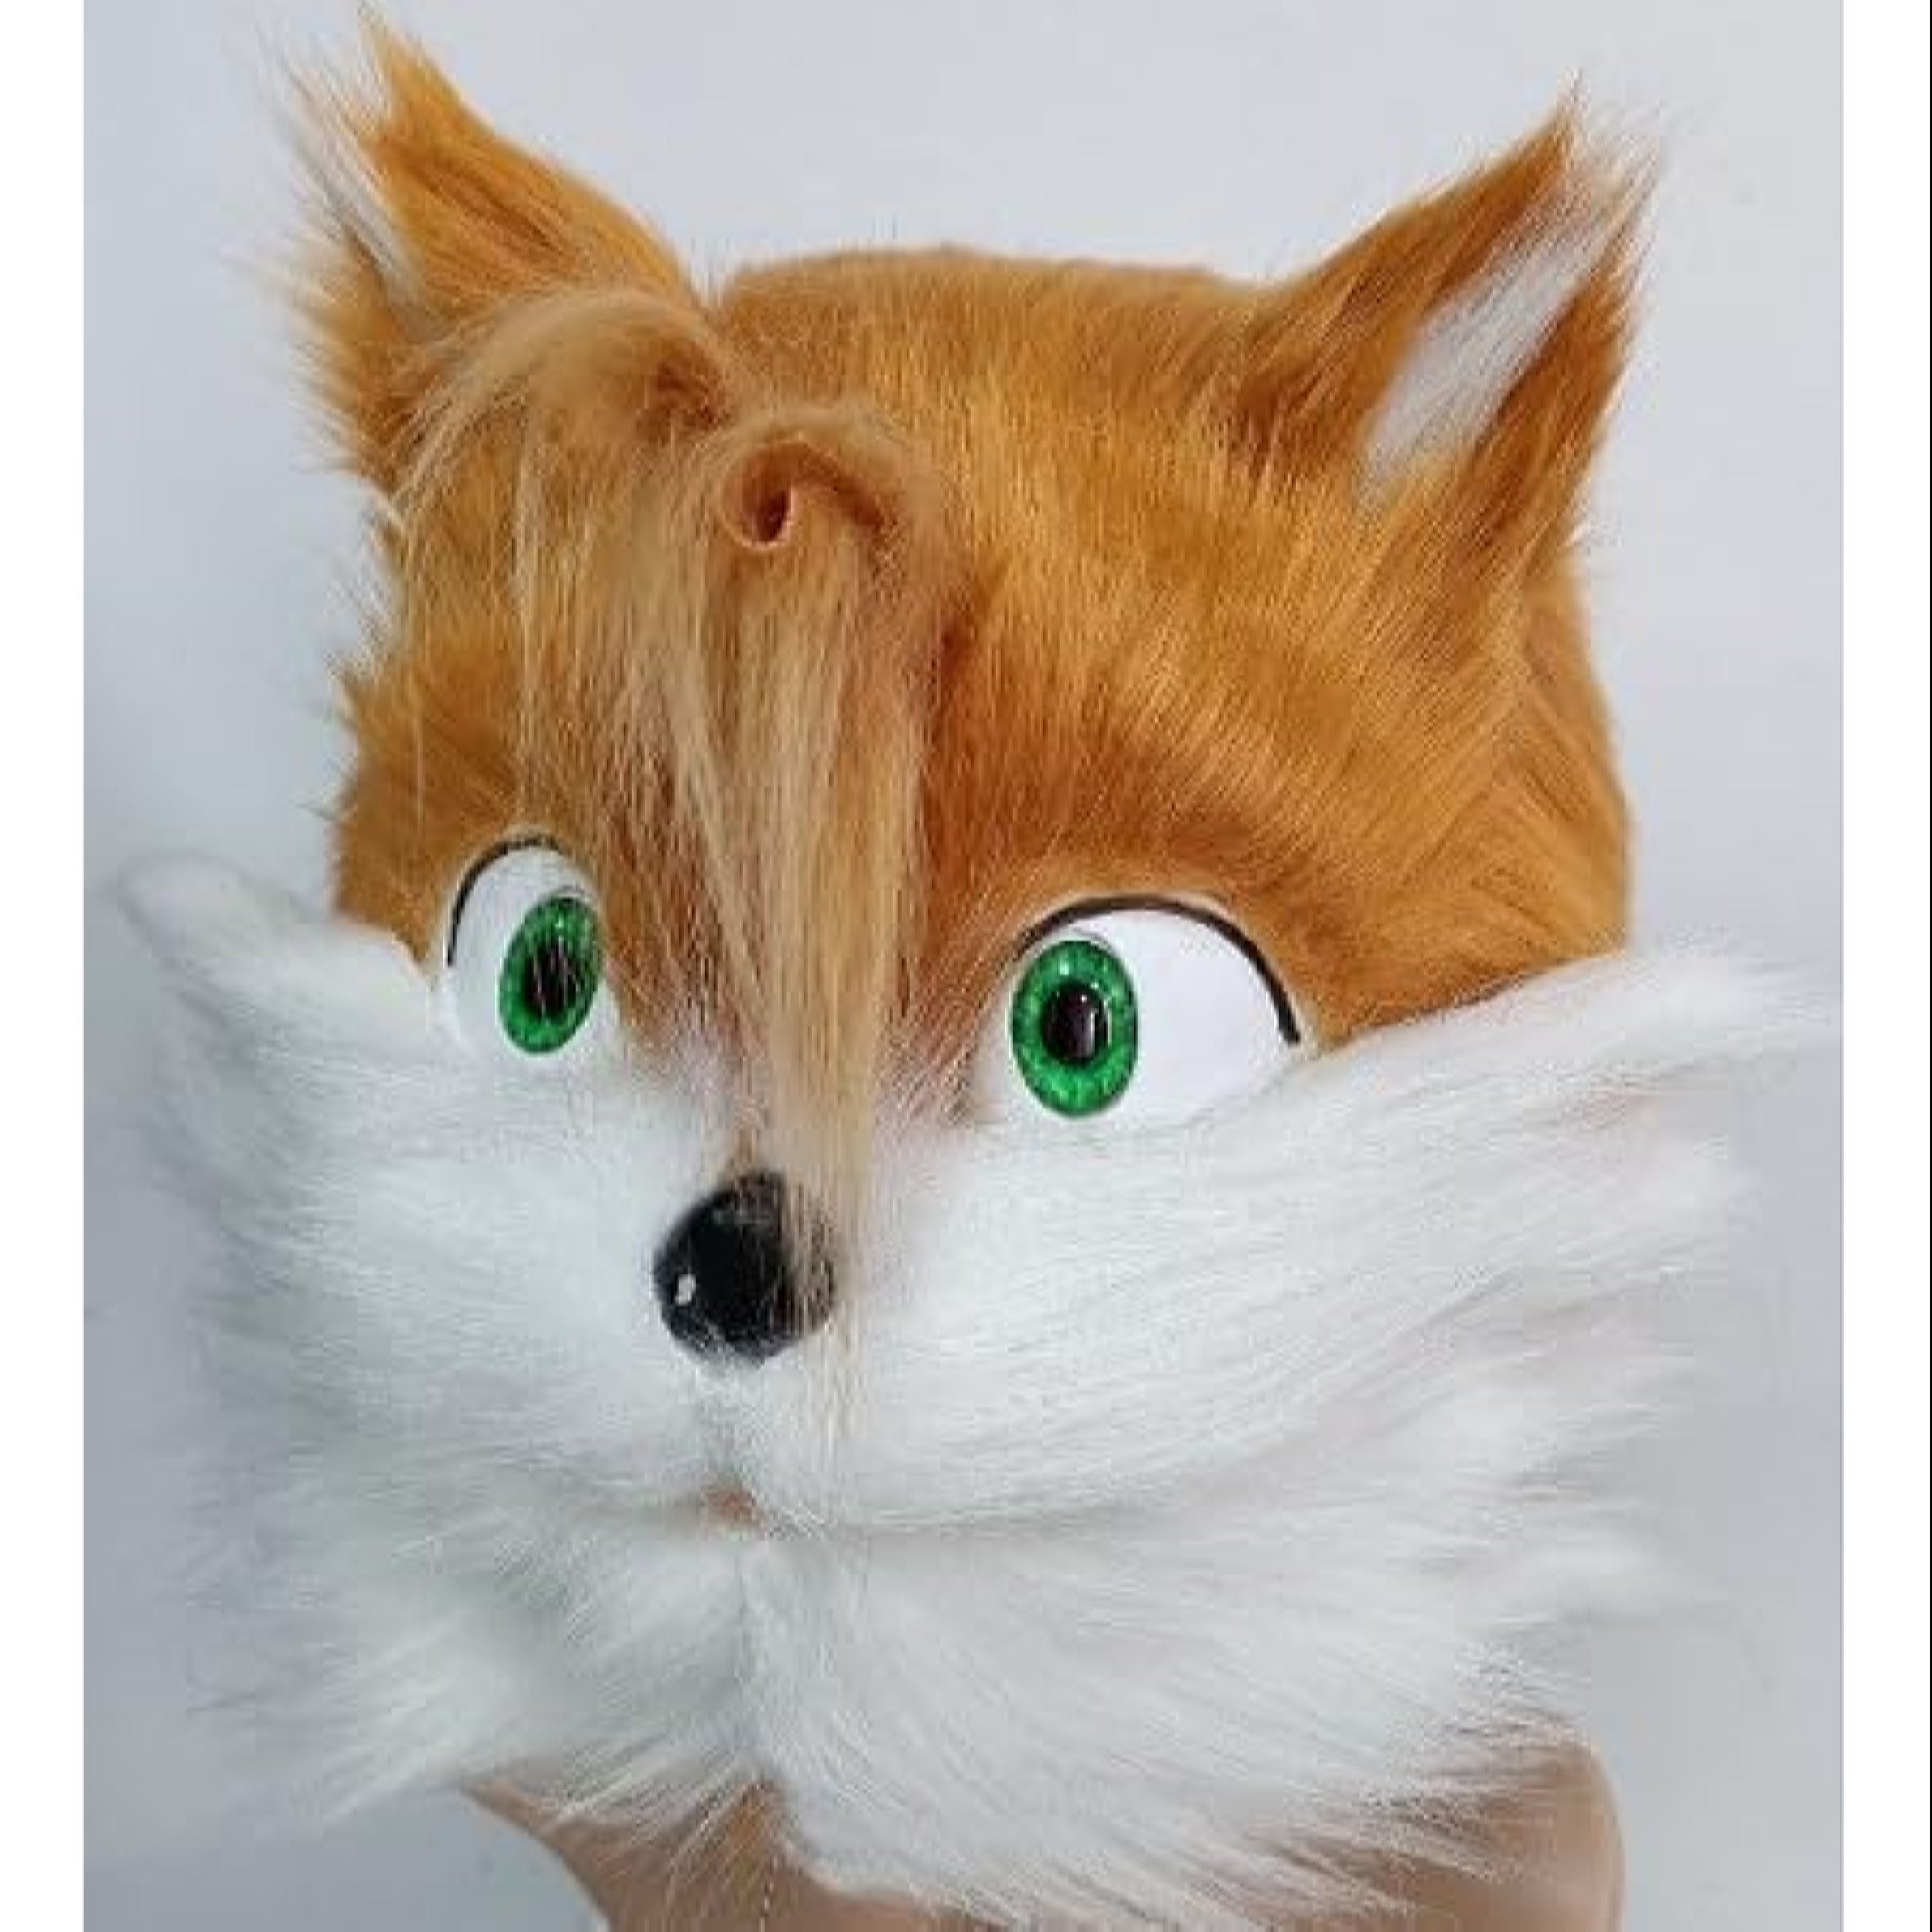 Tails Hedgehog Orange and White Latex Mask for Halloween & Fancy Dress